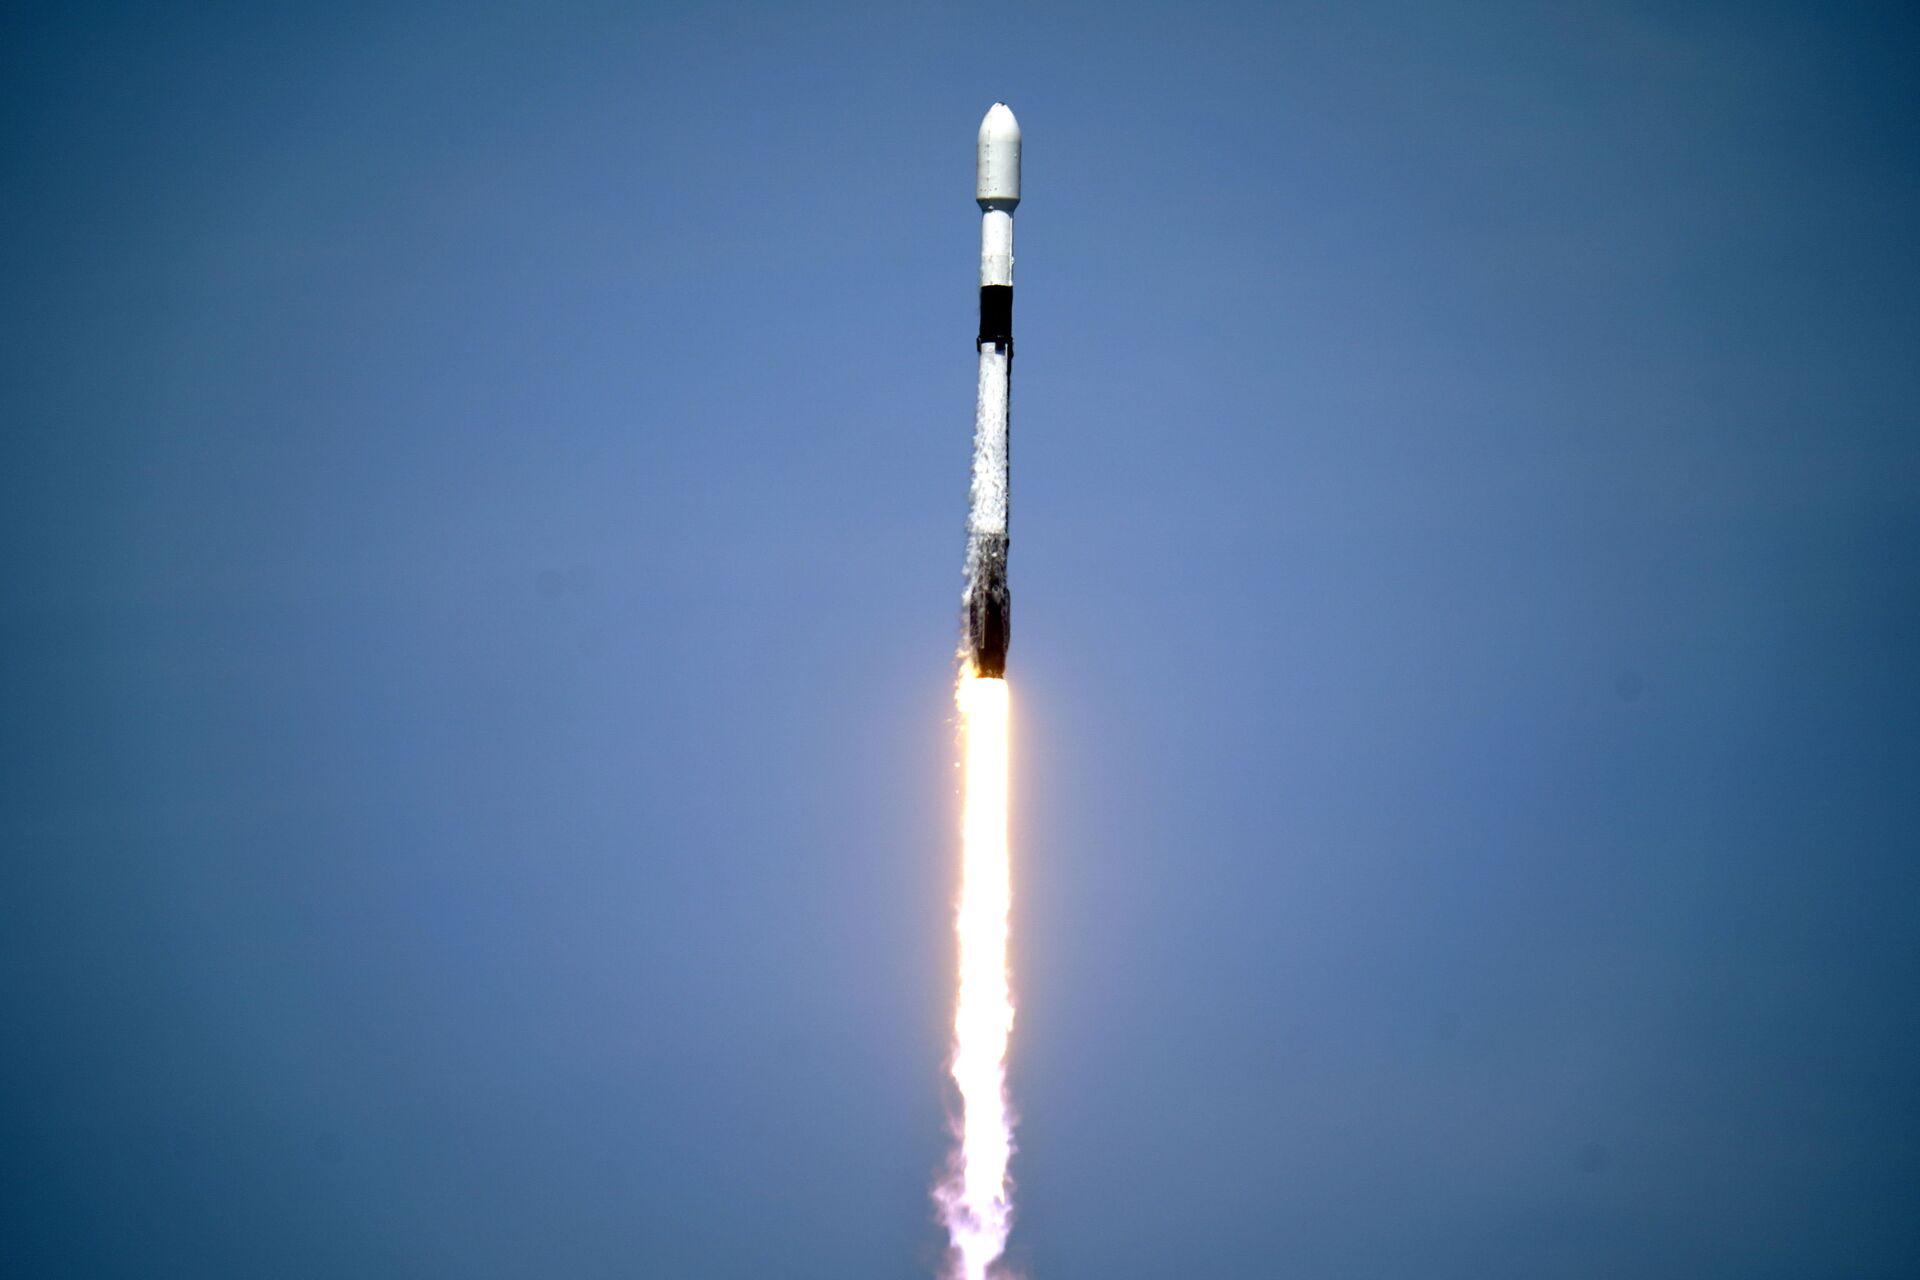 A SpaceX Falcon 9 rocket with the 26th batch of approximately 60 satellites for SpaceX's Starlink broadband network lifts off from pad 39A at the Kennedy Space Center in Cape Canaveral, Fla., Tuesday, May 4, 2021.  - Sputnik International, 1920, 09.02.2022